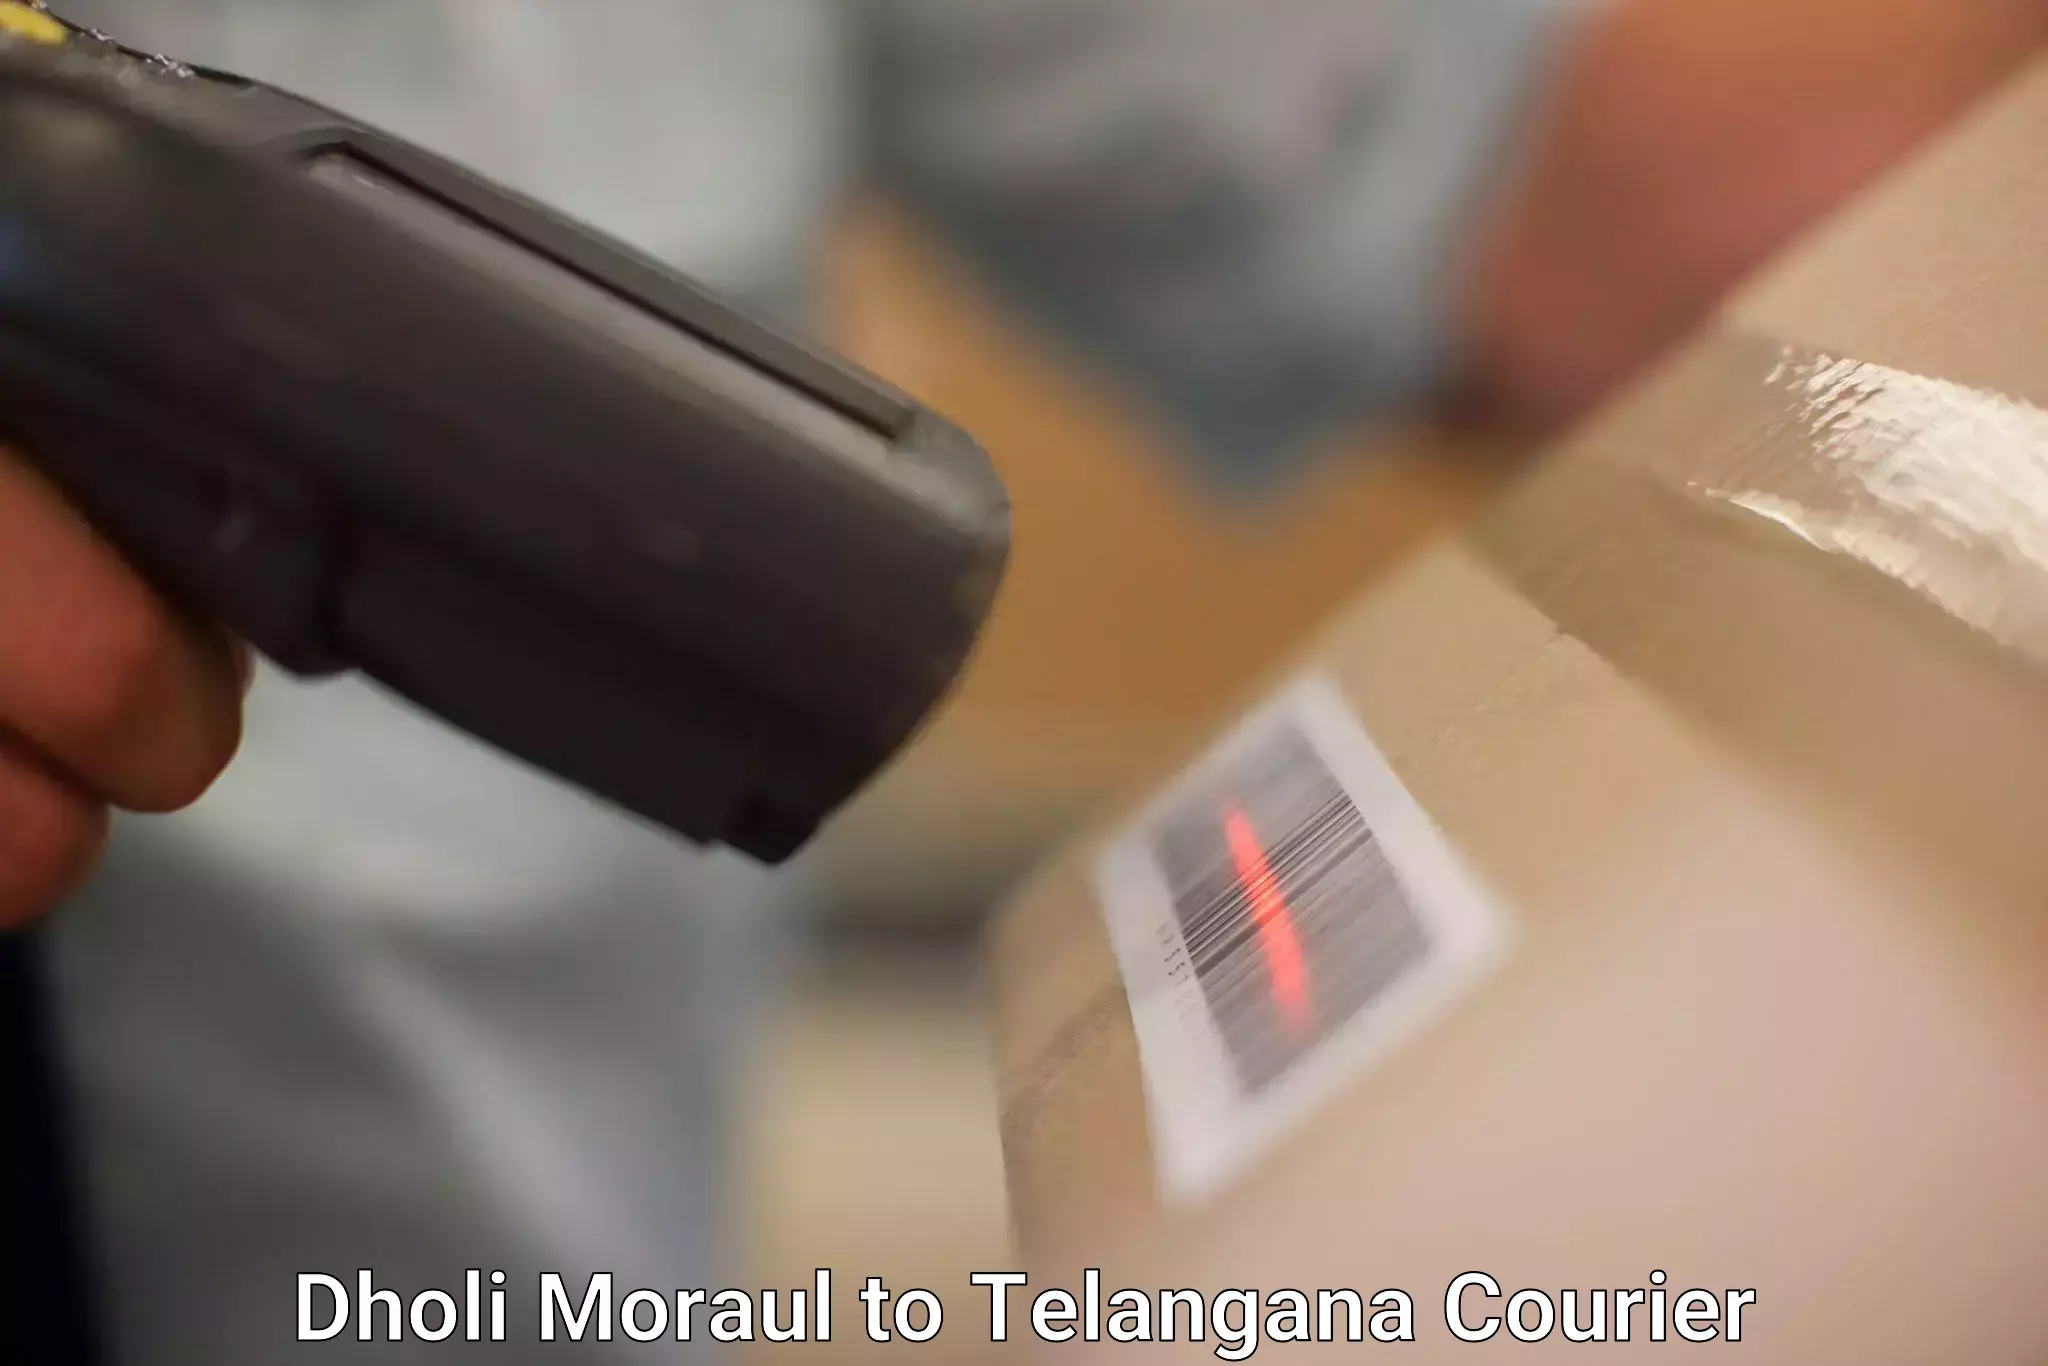 Parcel service for businesses Dholi Moraul to Hyderabad